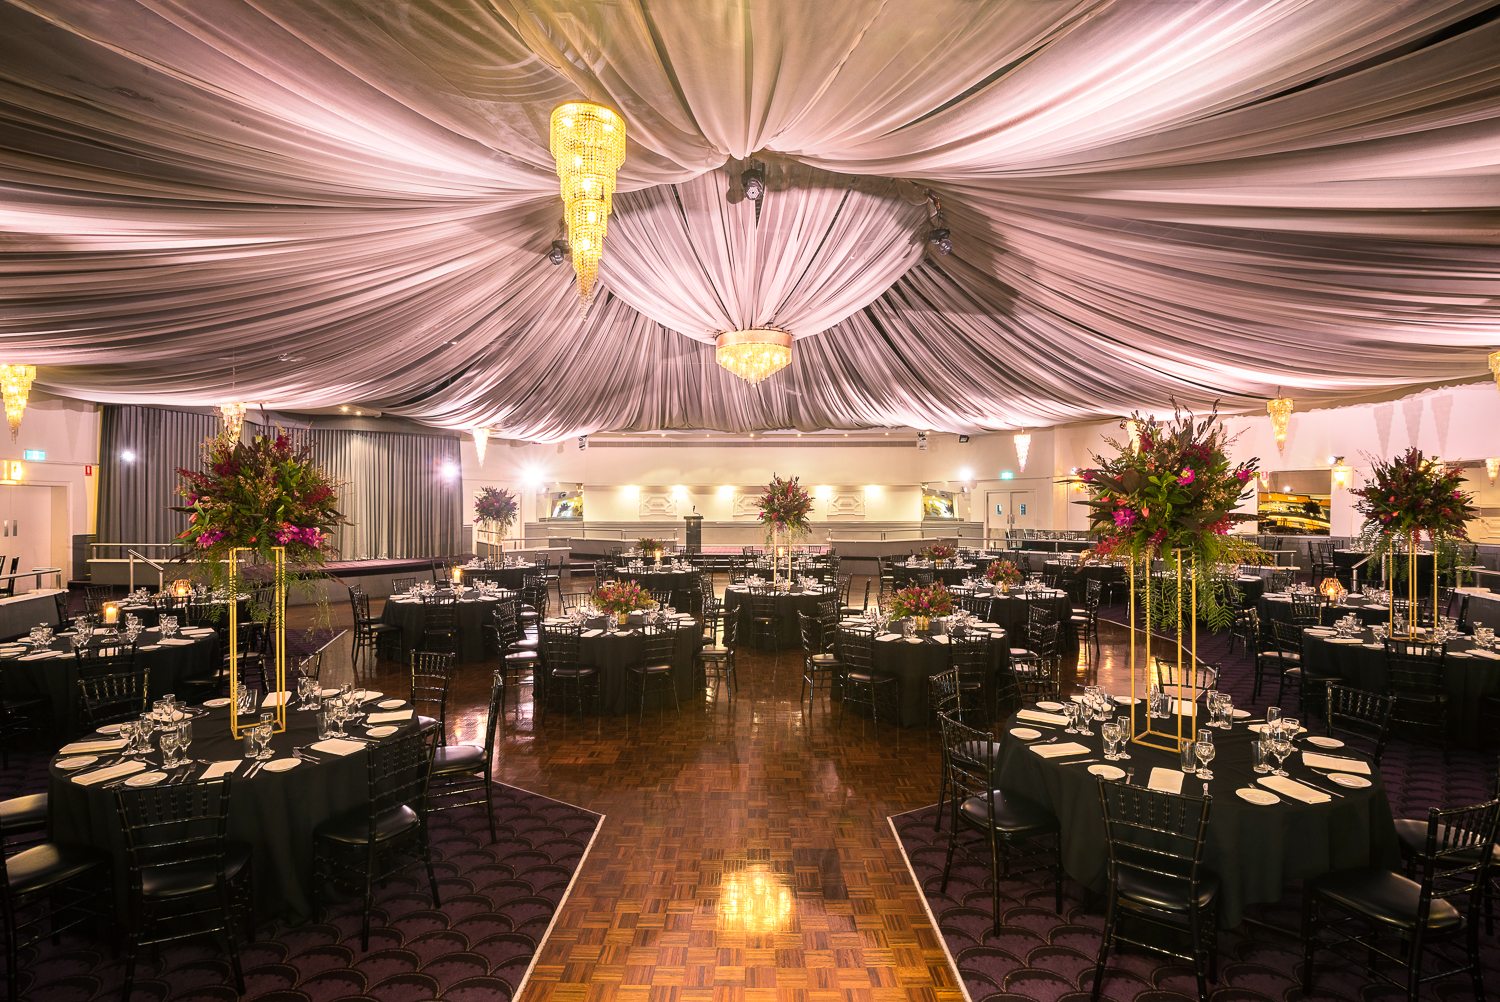 ballroom with mauve canopy, black draped tables and chairs